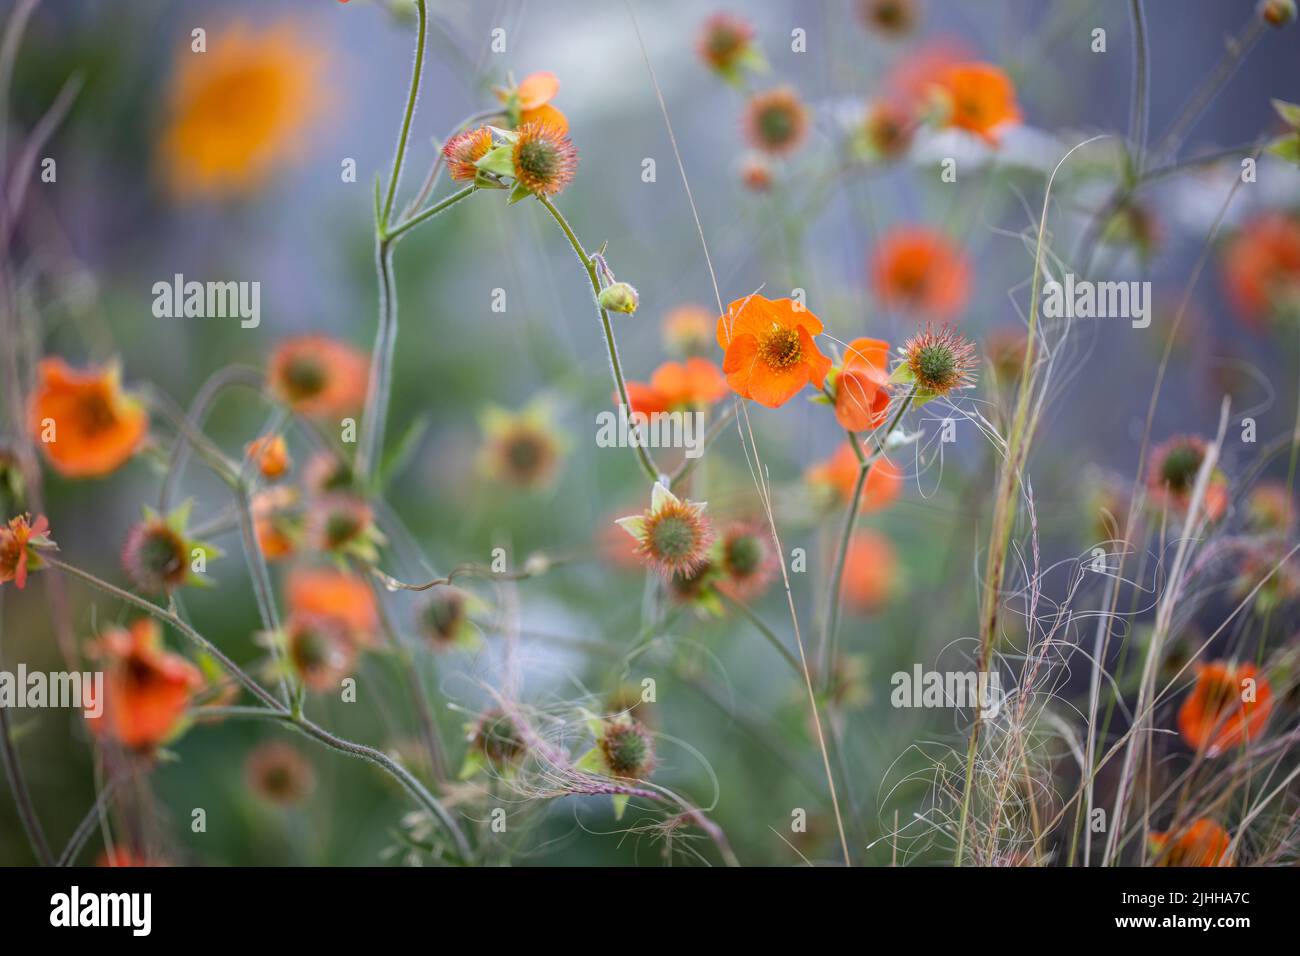 Geum totally tangerine in the garden, shallow depth of field Stock Photo